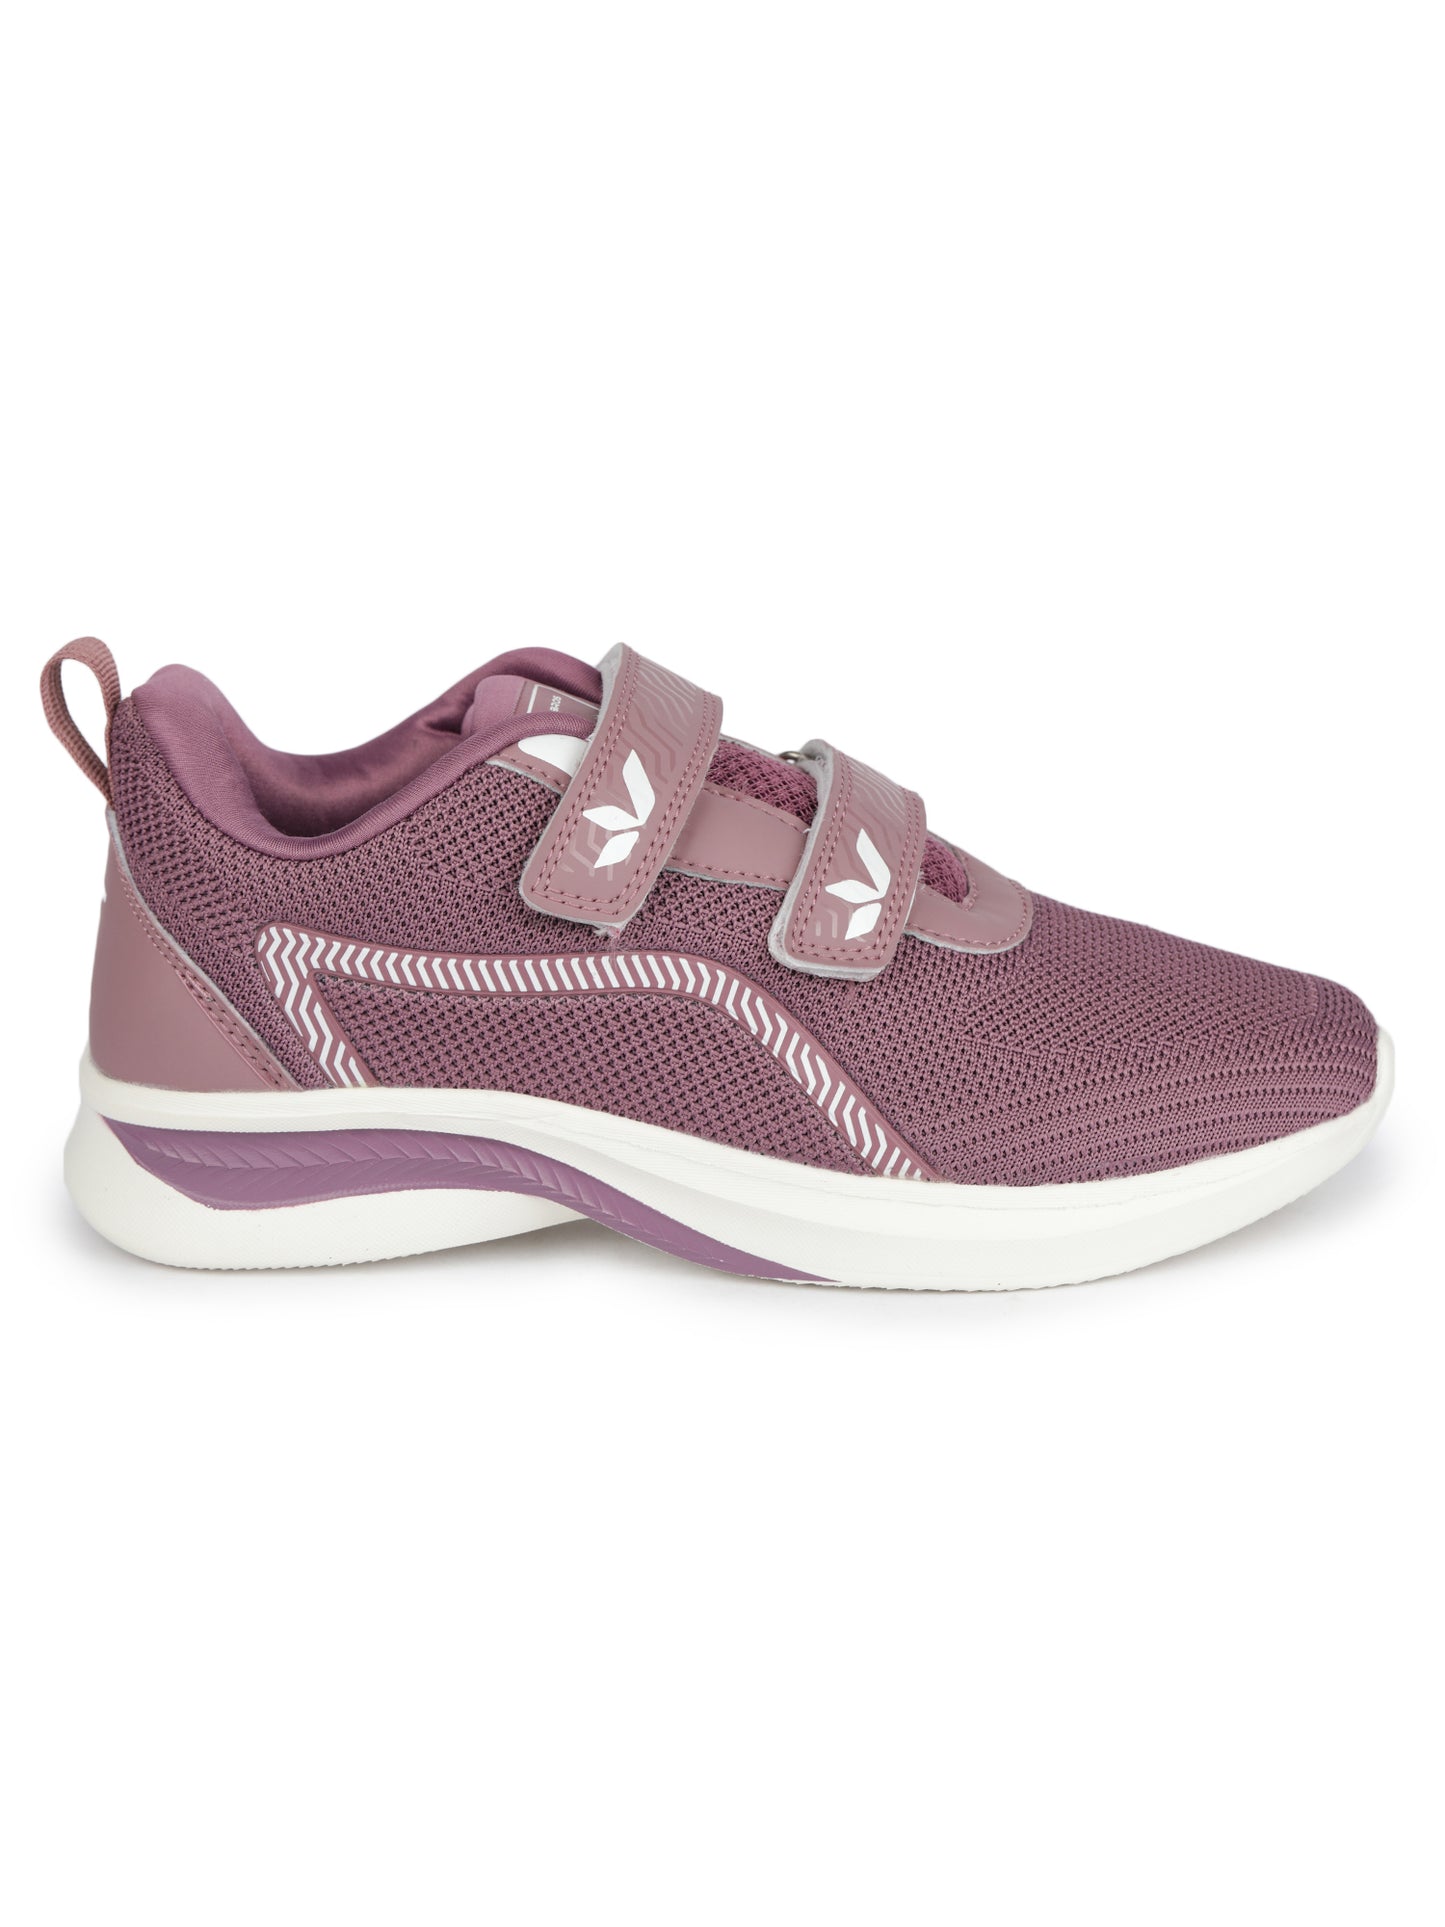 LONDON SPORT-SHOES FOR LADIES